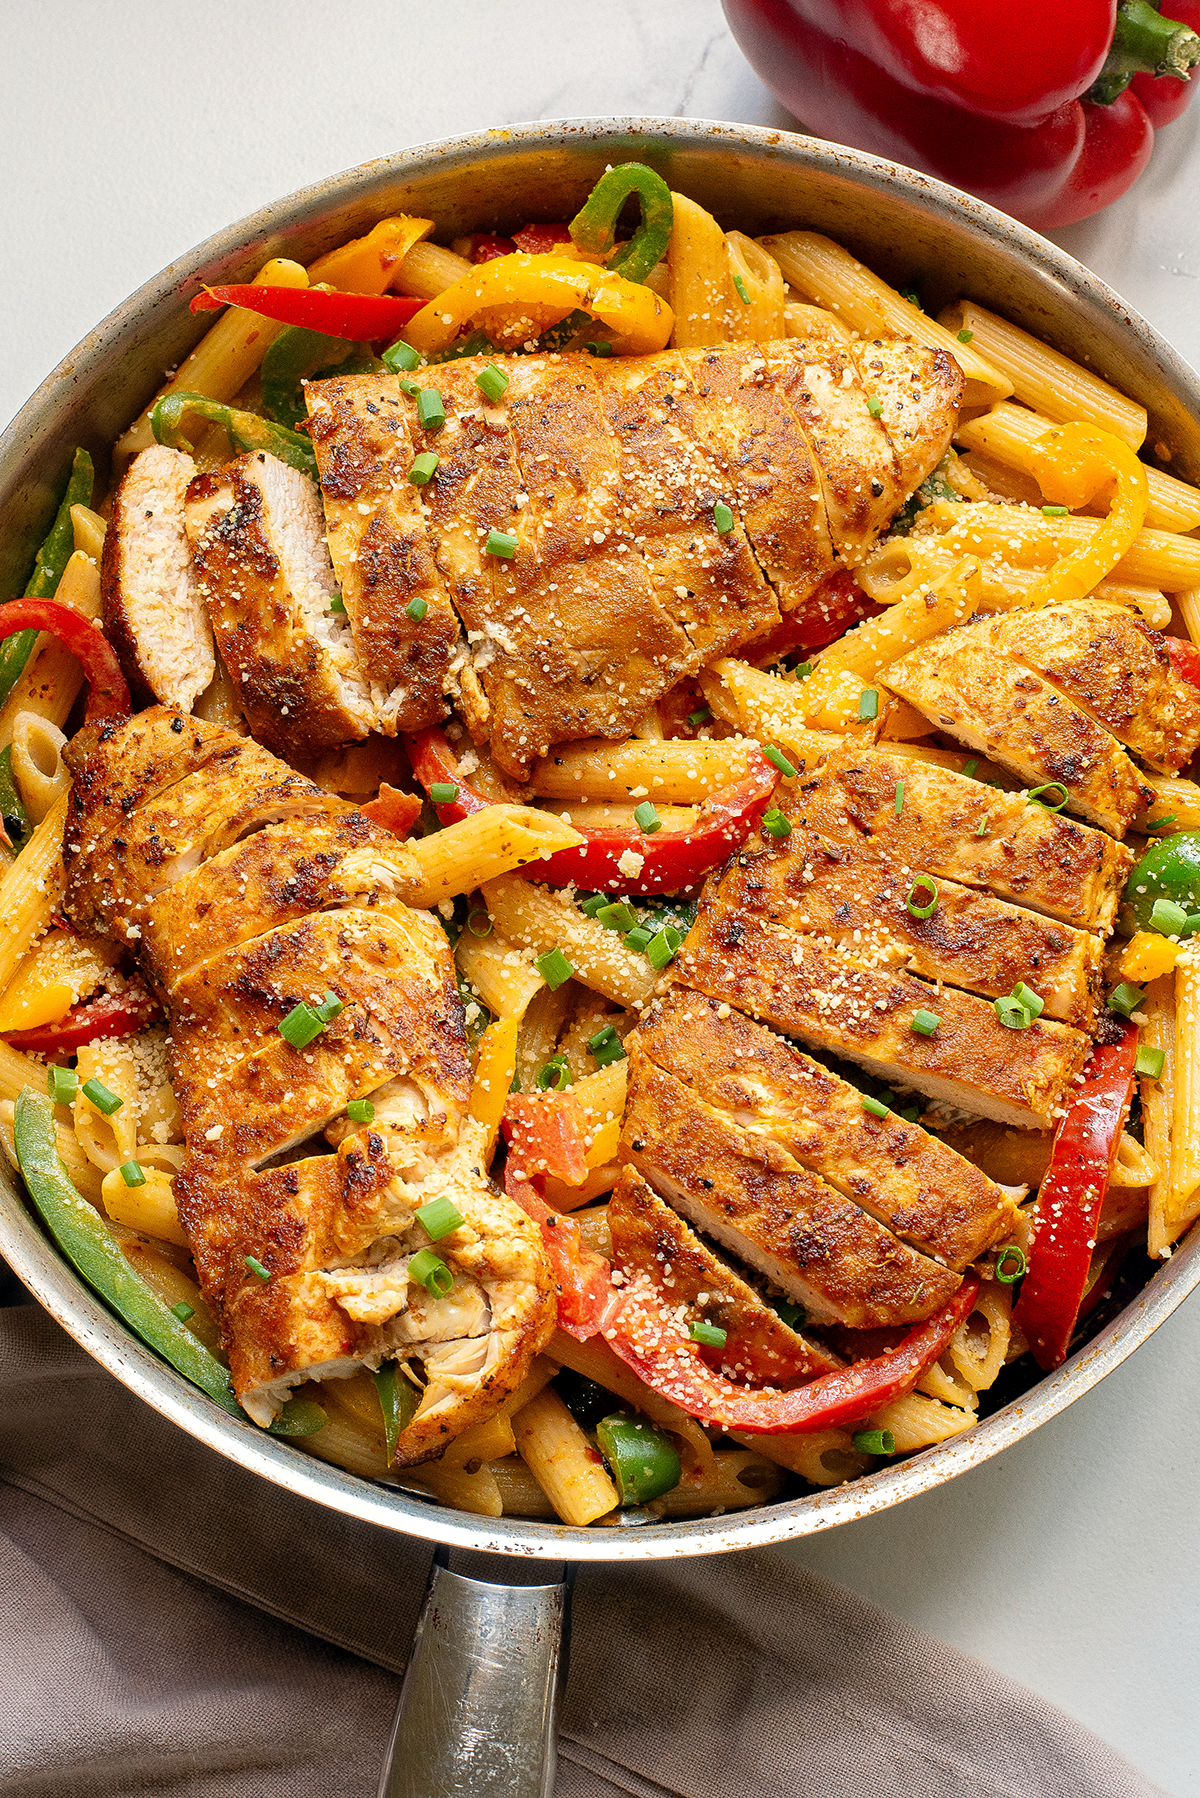 Jerk chicken pasta recipe (also known as rasta pasta with jerk seasoned chicken, bell peppers and creamy pasta in a skillet